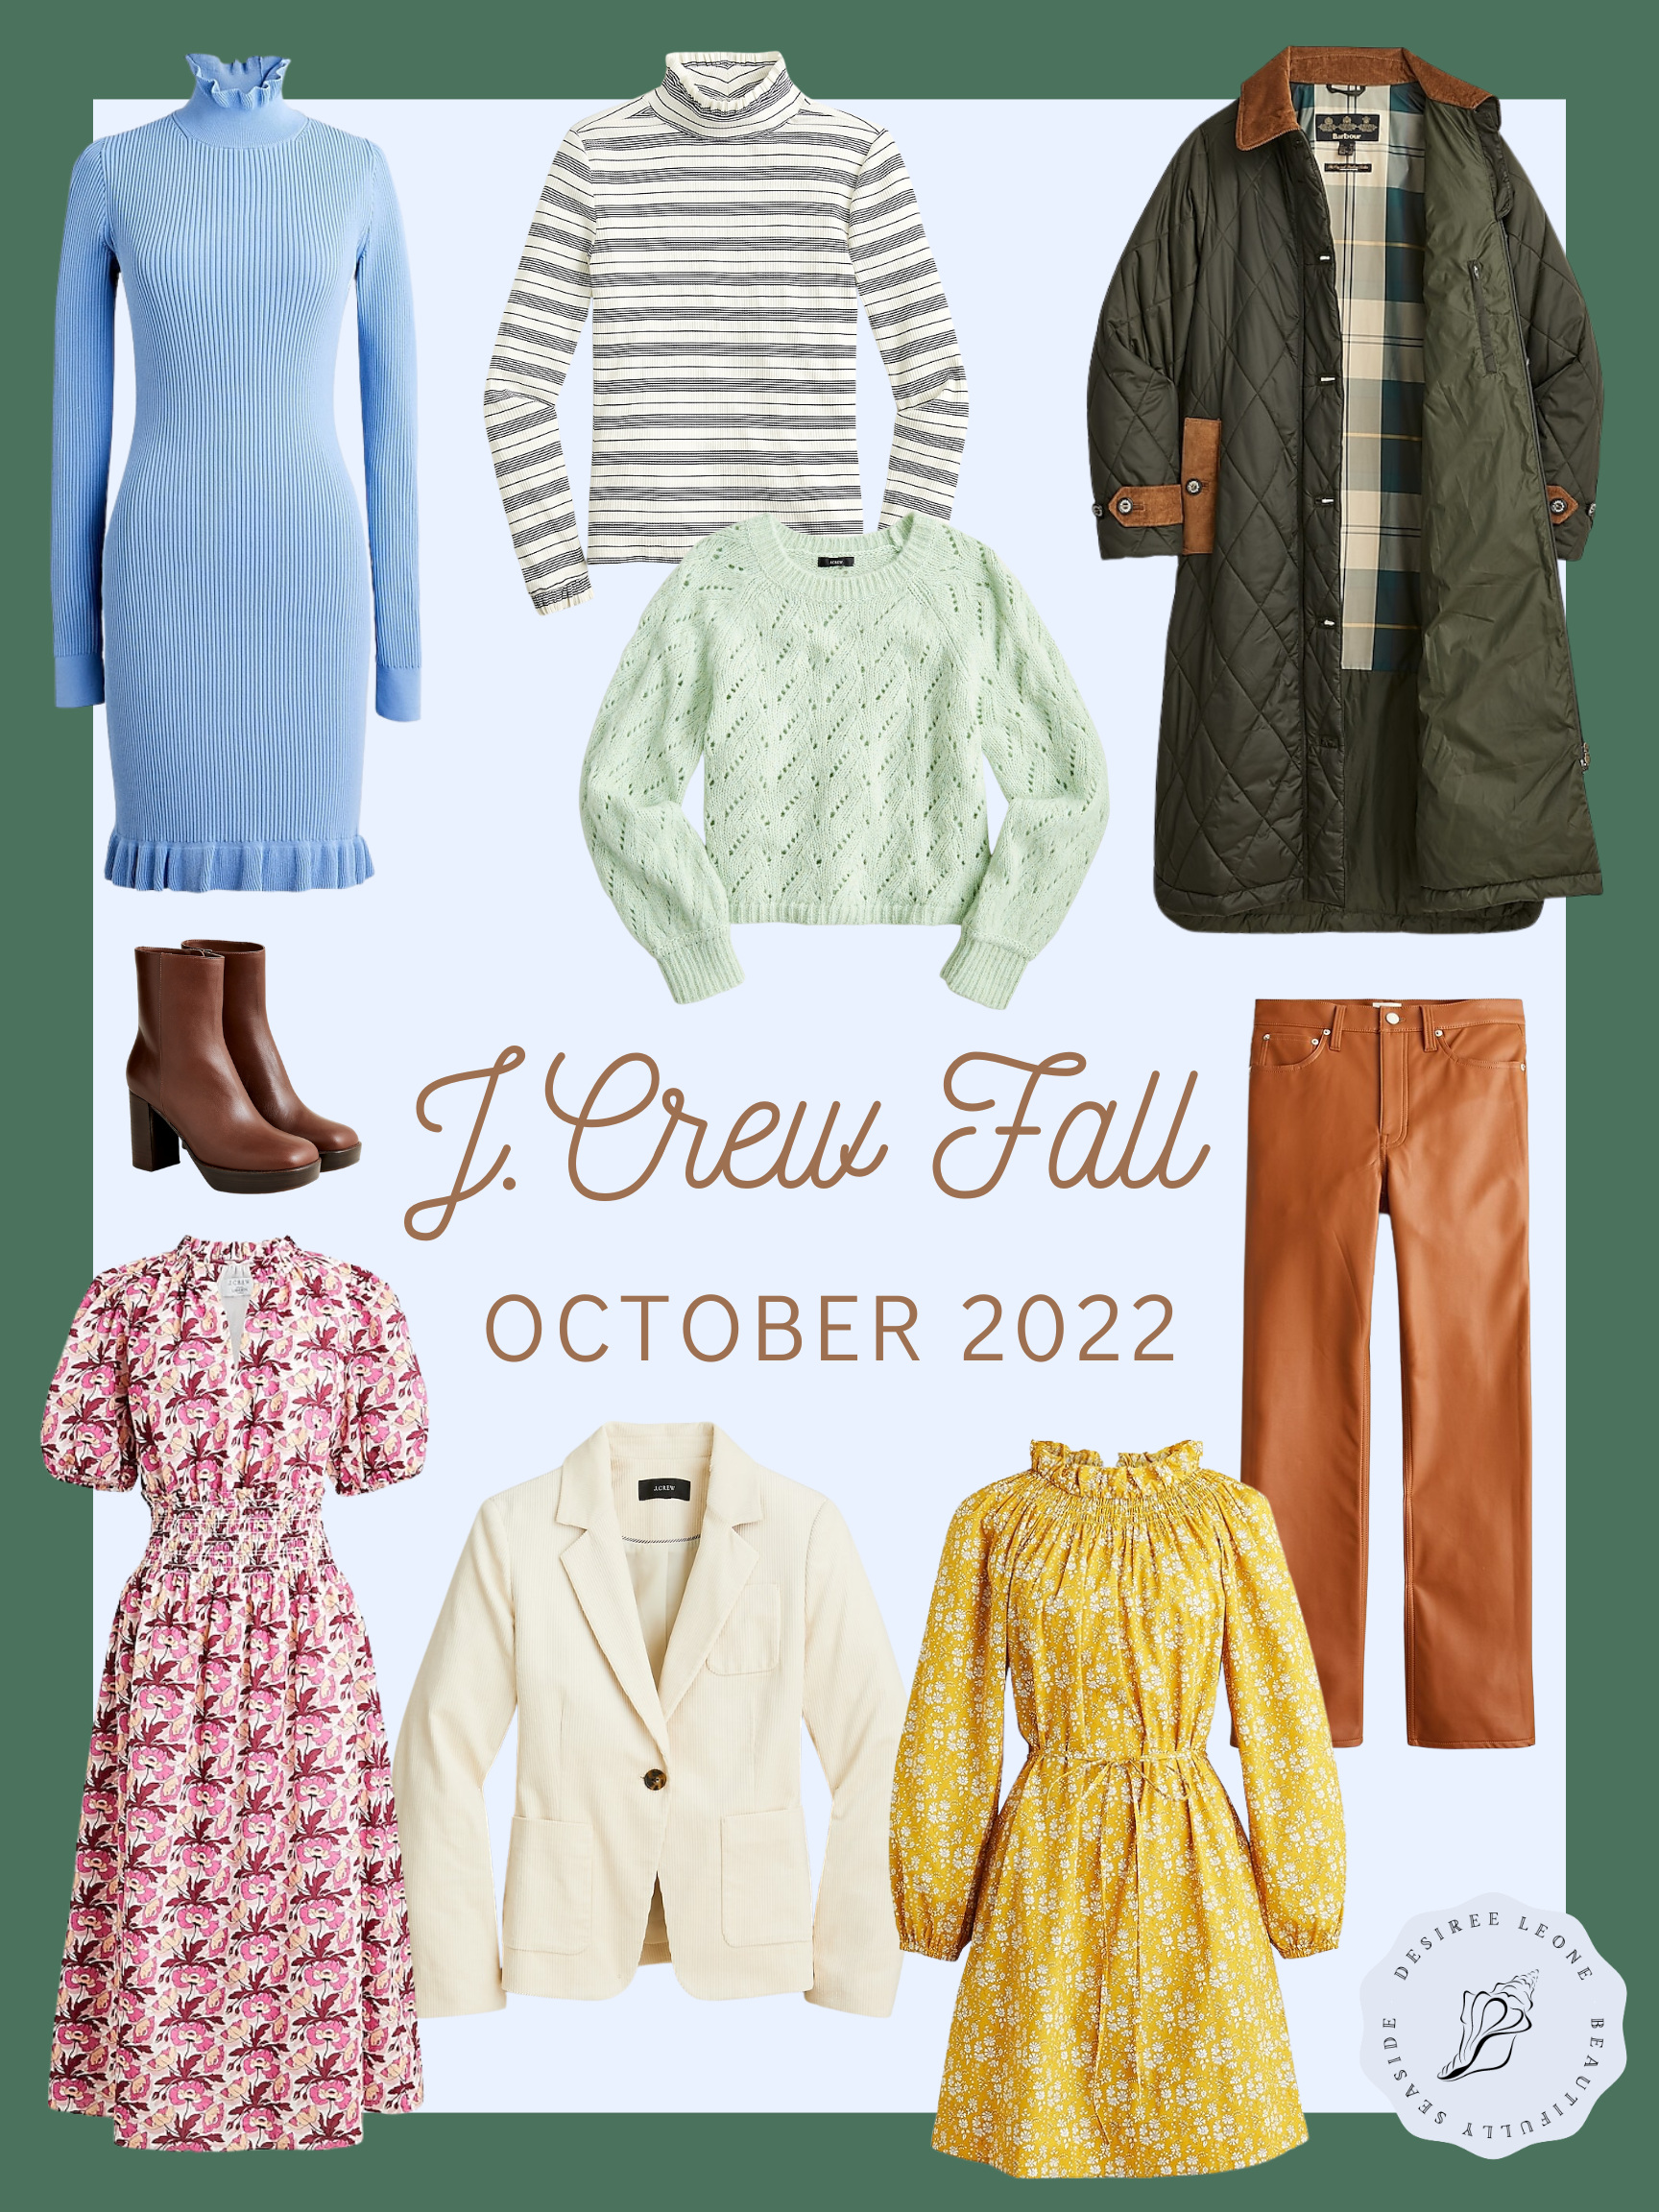 THE OCTOBER FALL COLLECTION AT J.CREW IS HERE by Desiree Leone of Beautifully Seaside